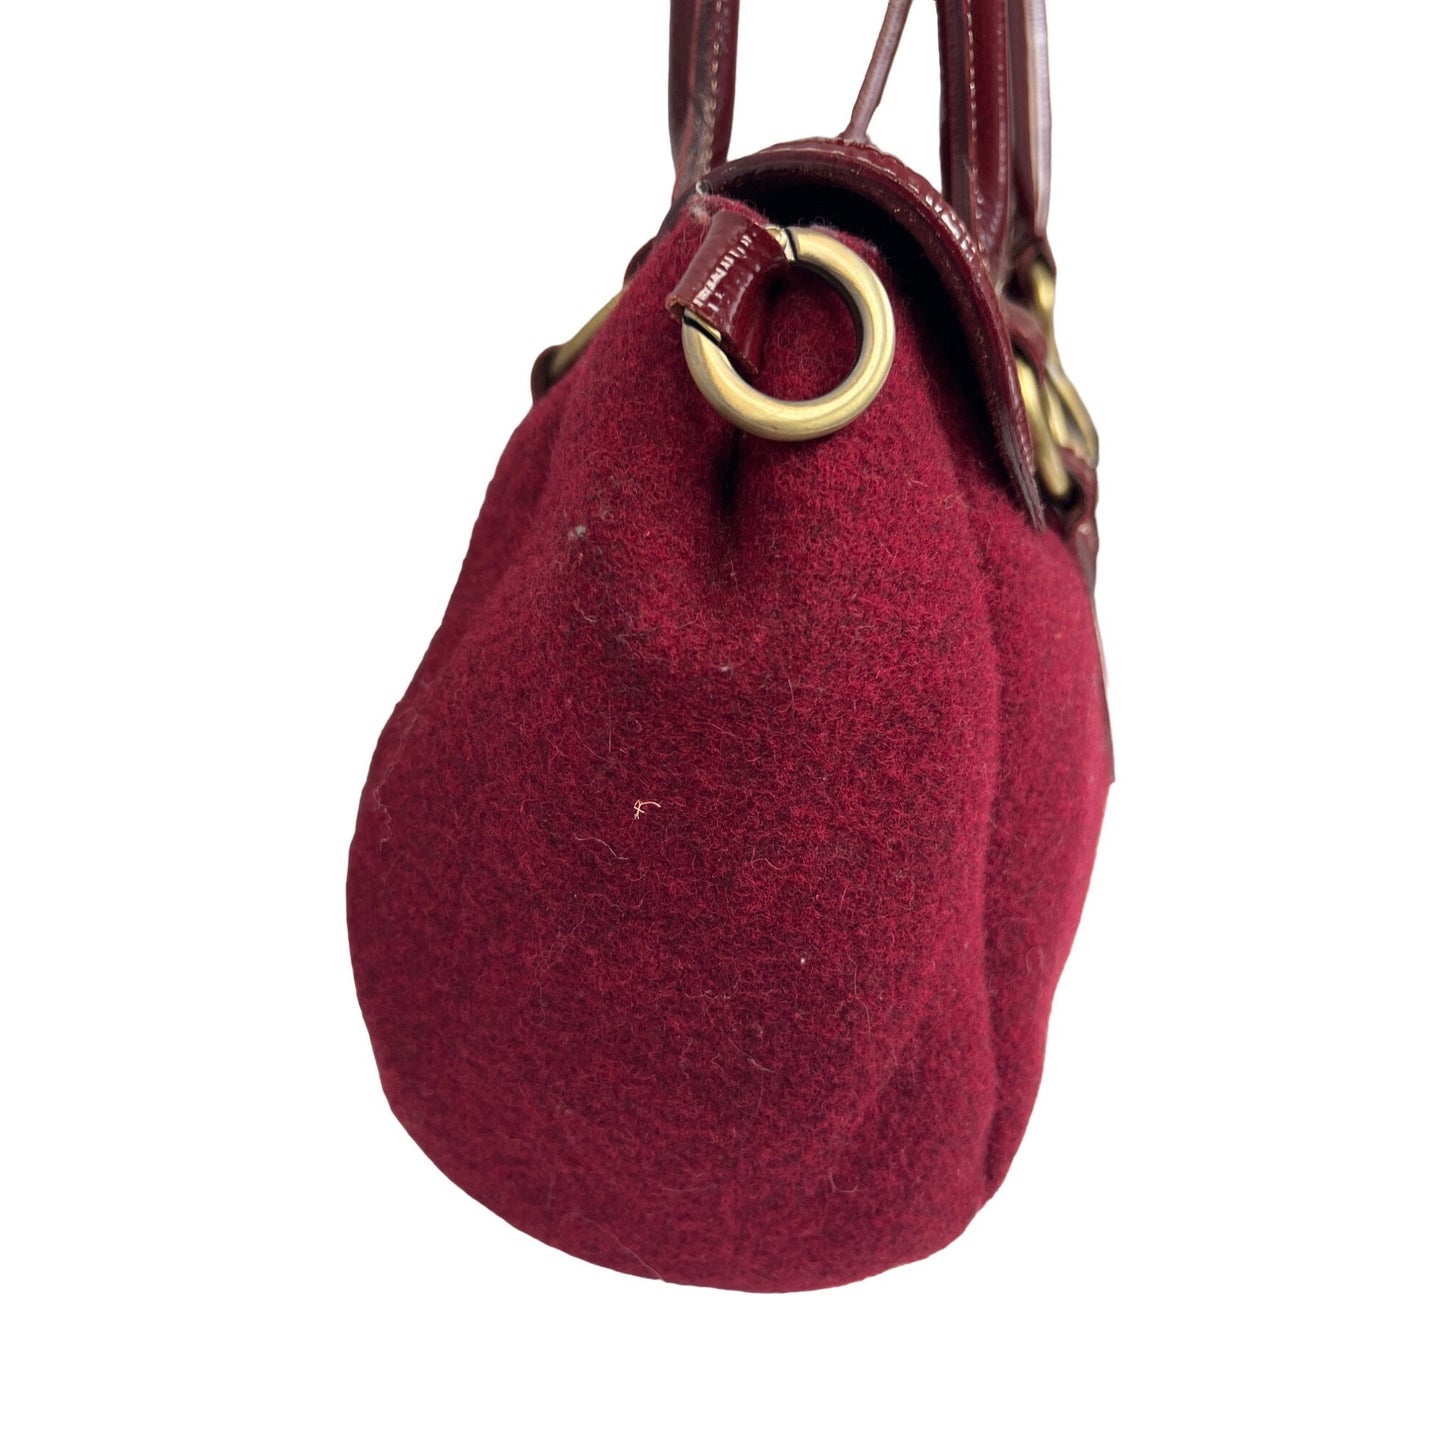 Sofia C Red Wool Felt Shoulder Bag with Patent Leather Trim